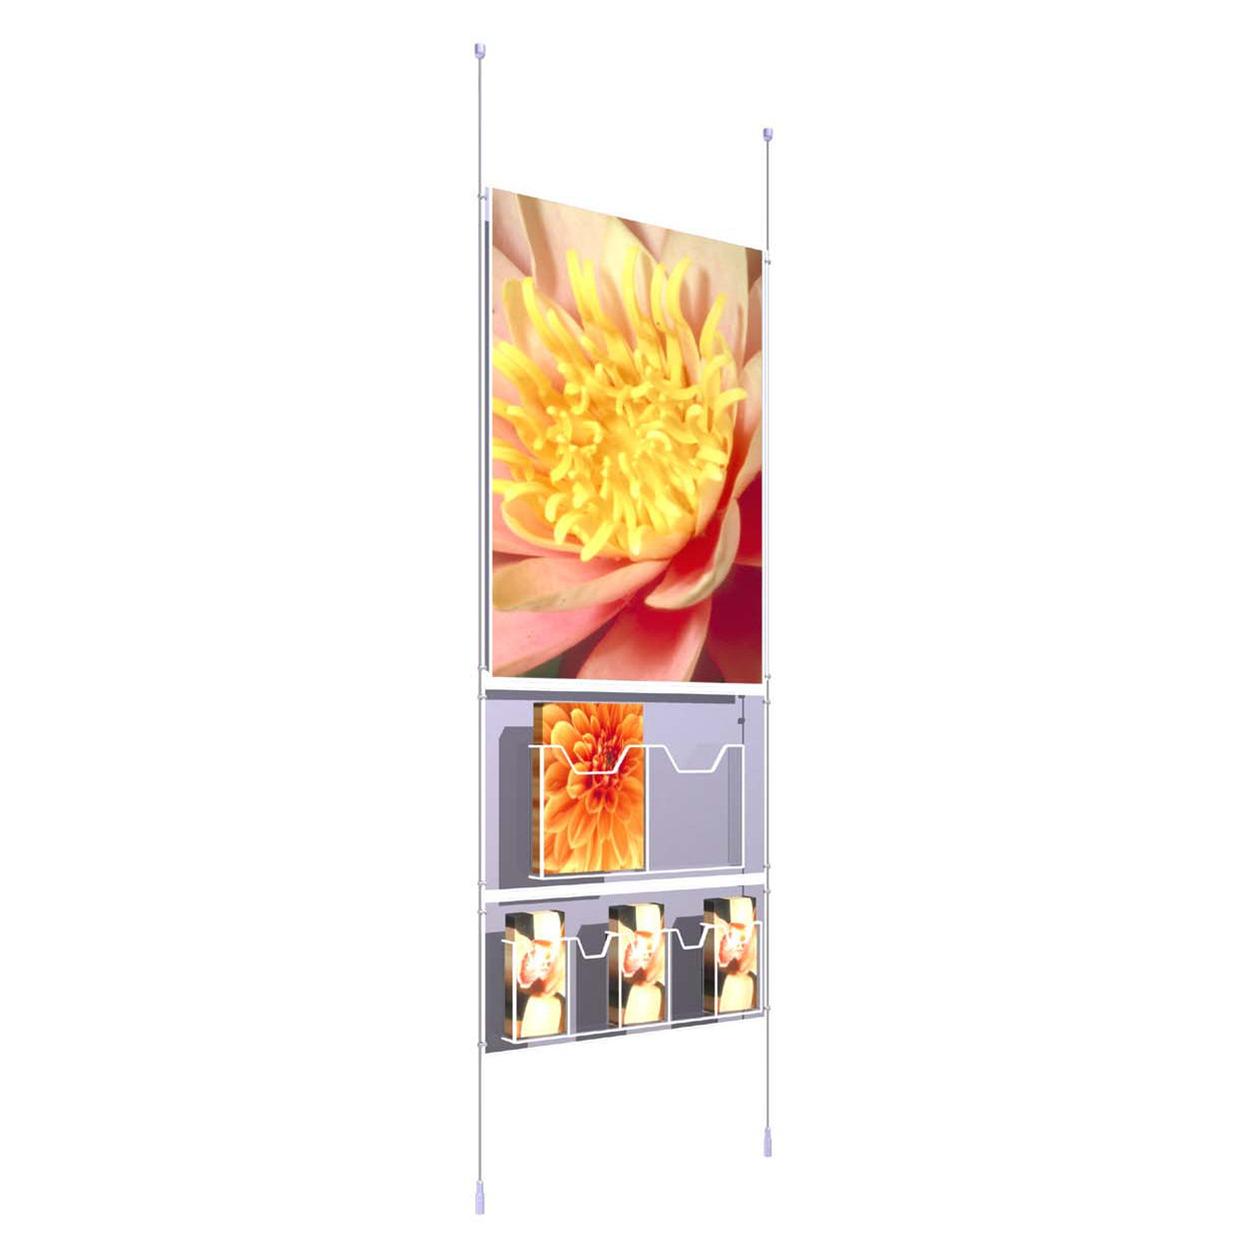 Ceiling/Floor Poster Kit A1 x 1 with 1 x Double A4 Dispenser and 1 x Quintuple 1/3 A4 Dispenser